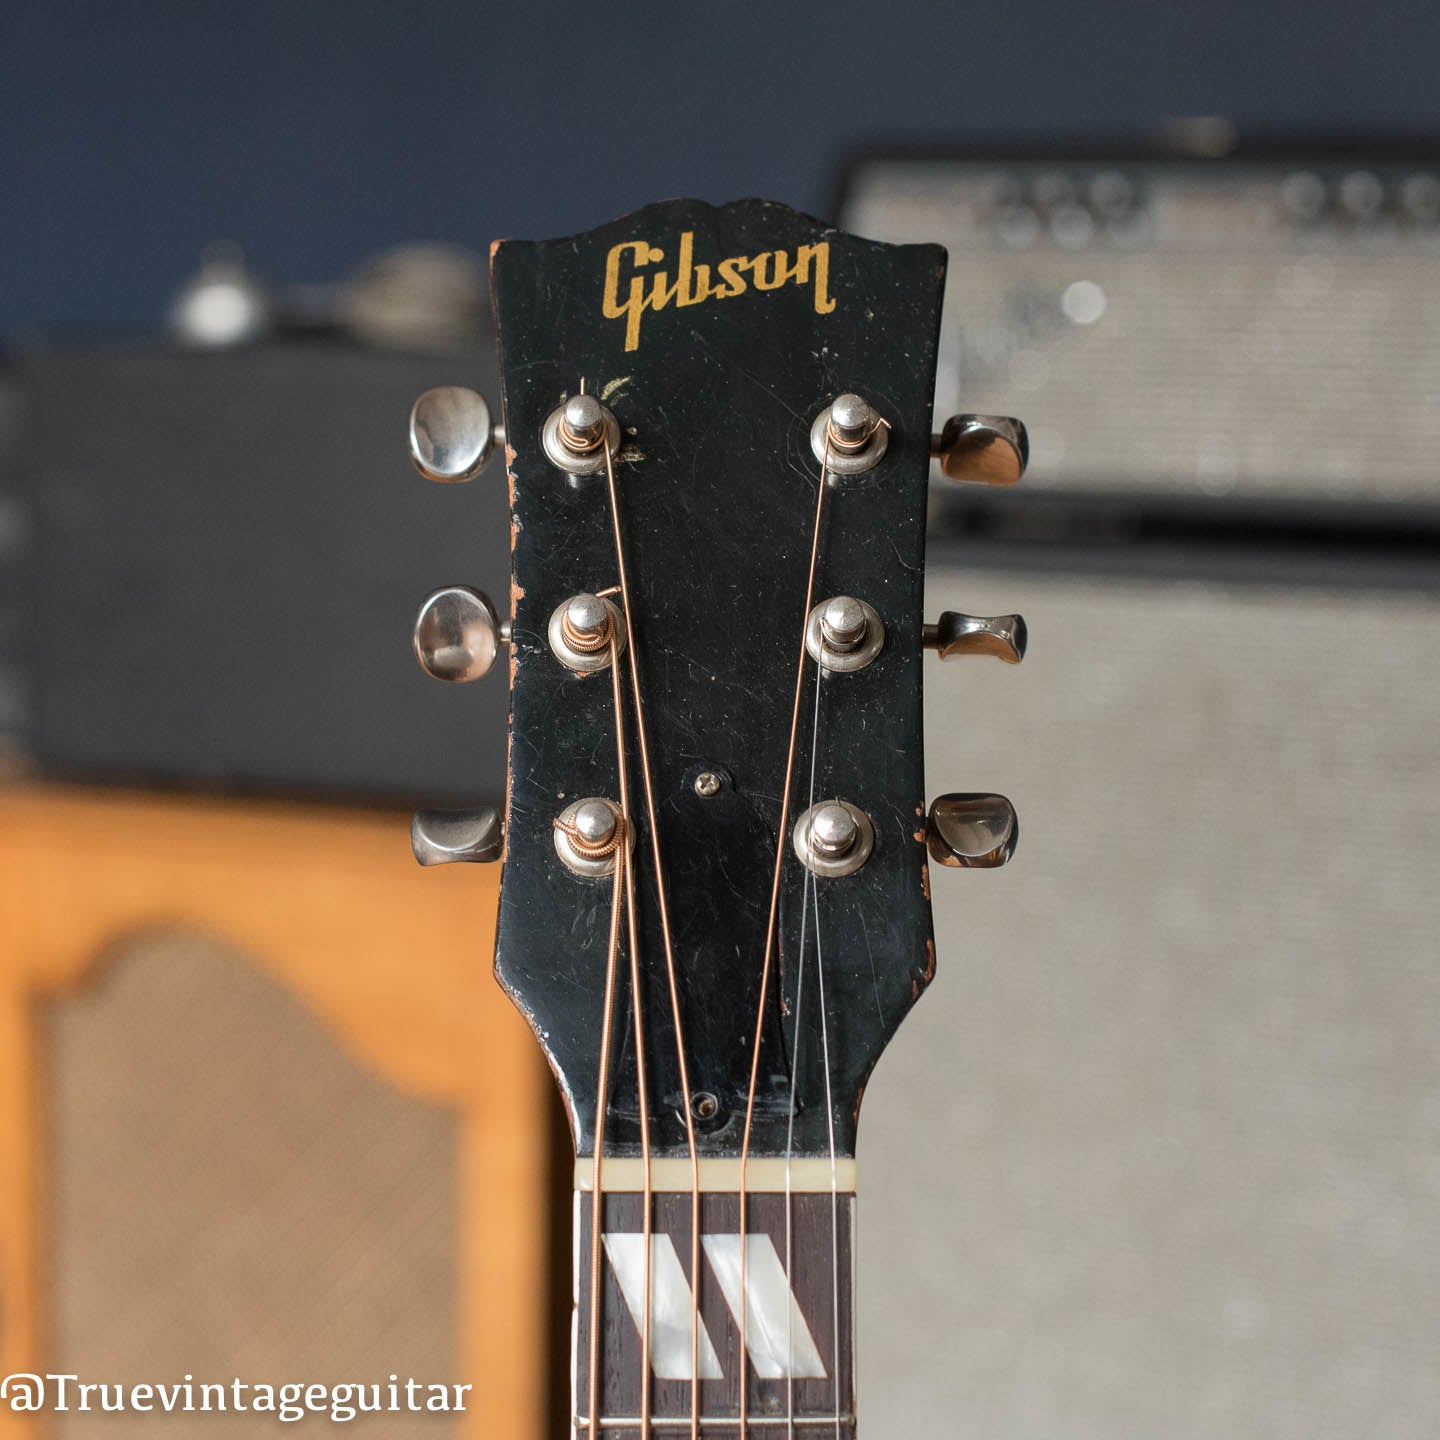 Gibson headstock, 1950s acoustic guitar